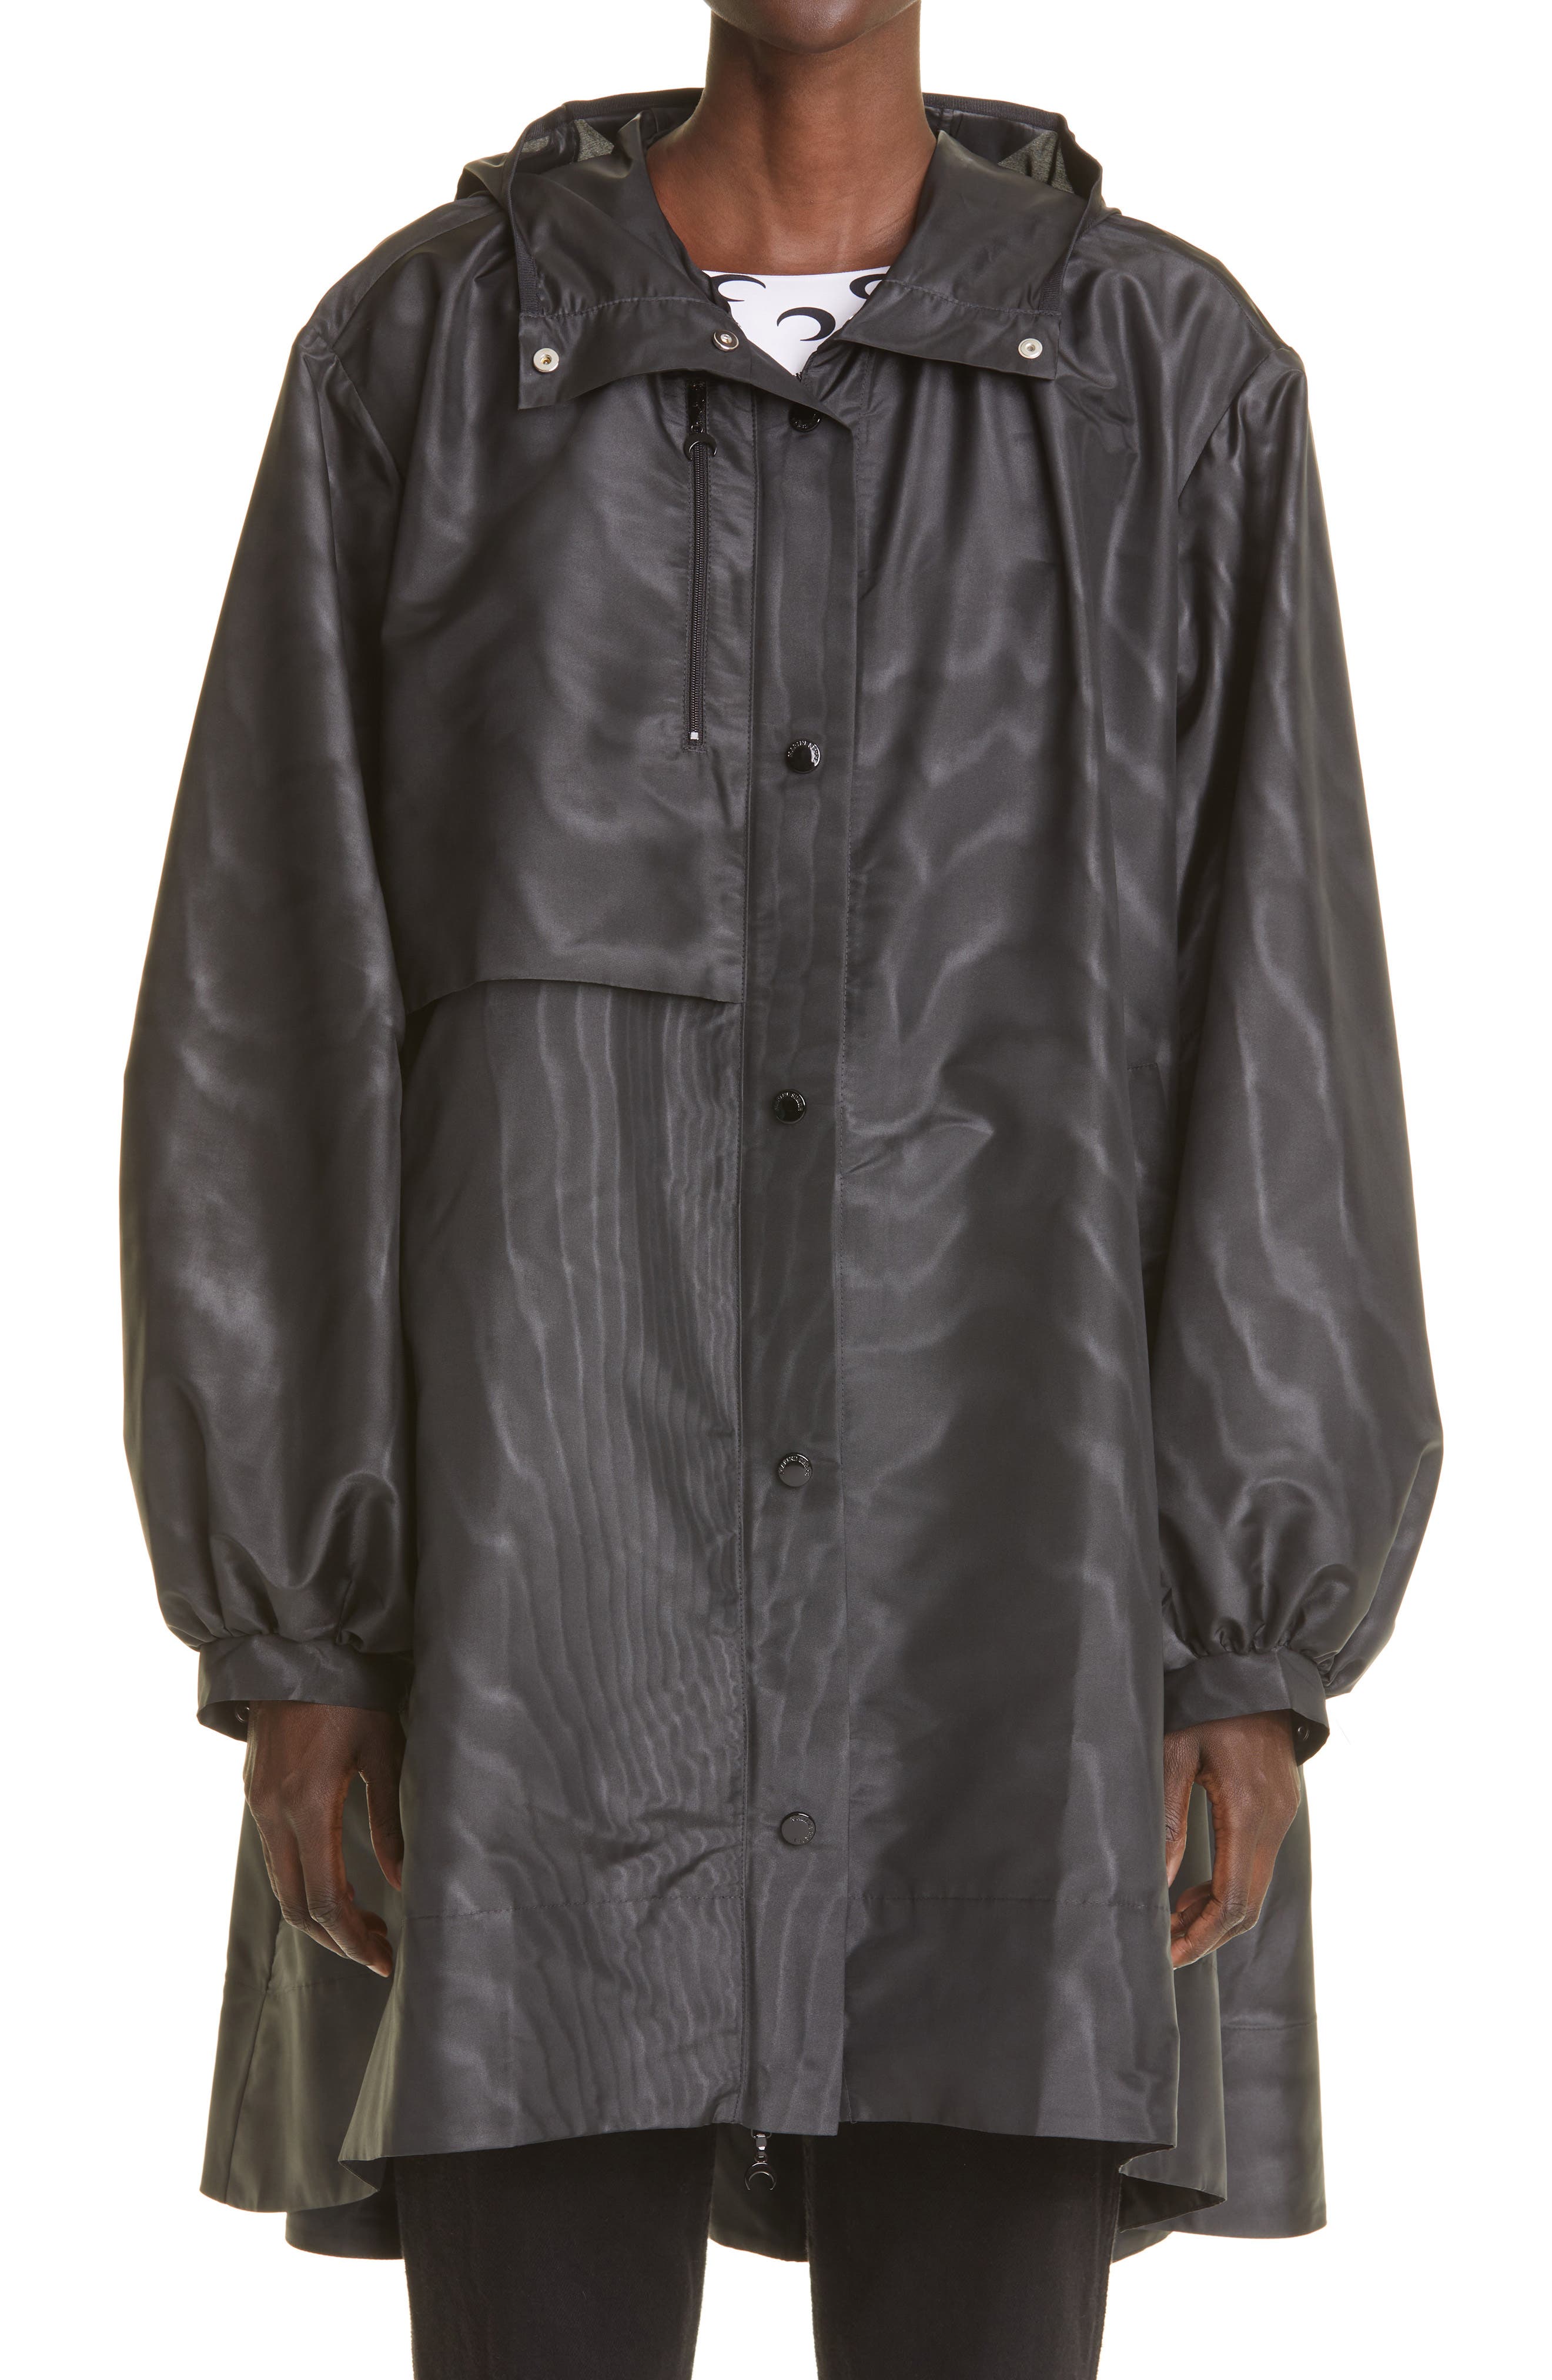 Marine Serre Hooded Moire Windbreaker in Black at Nordstrom, Size Small